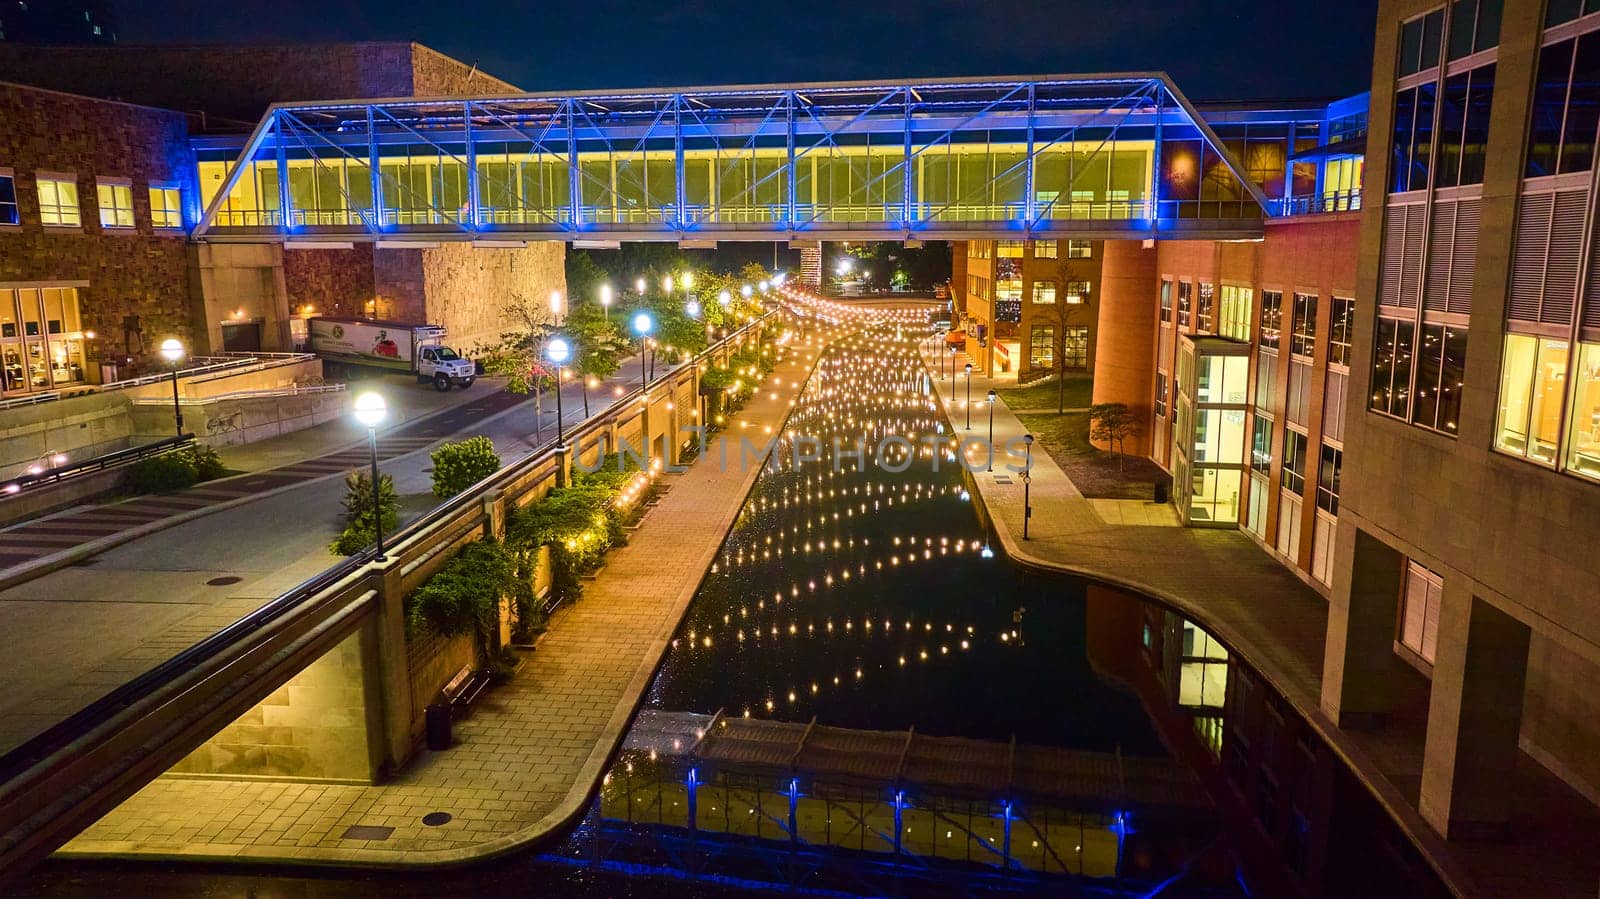 Aerial Night View of Canal with Pedestrian Bridge in Urban Indianapolis by njproductions